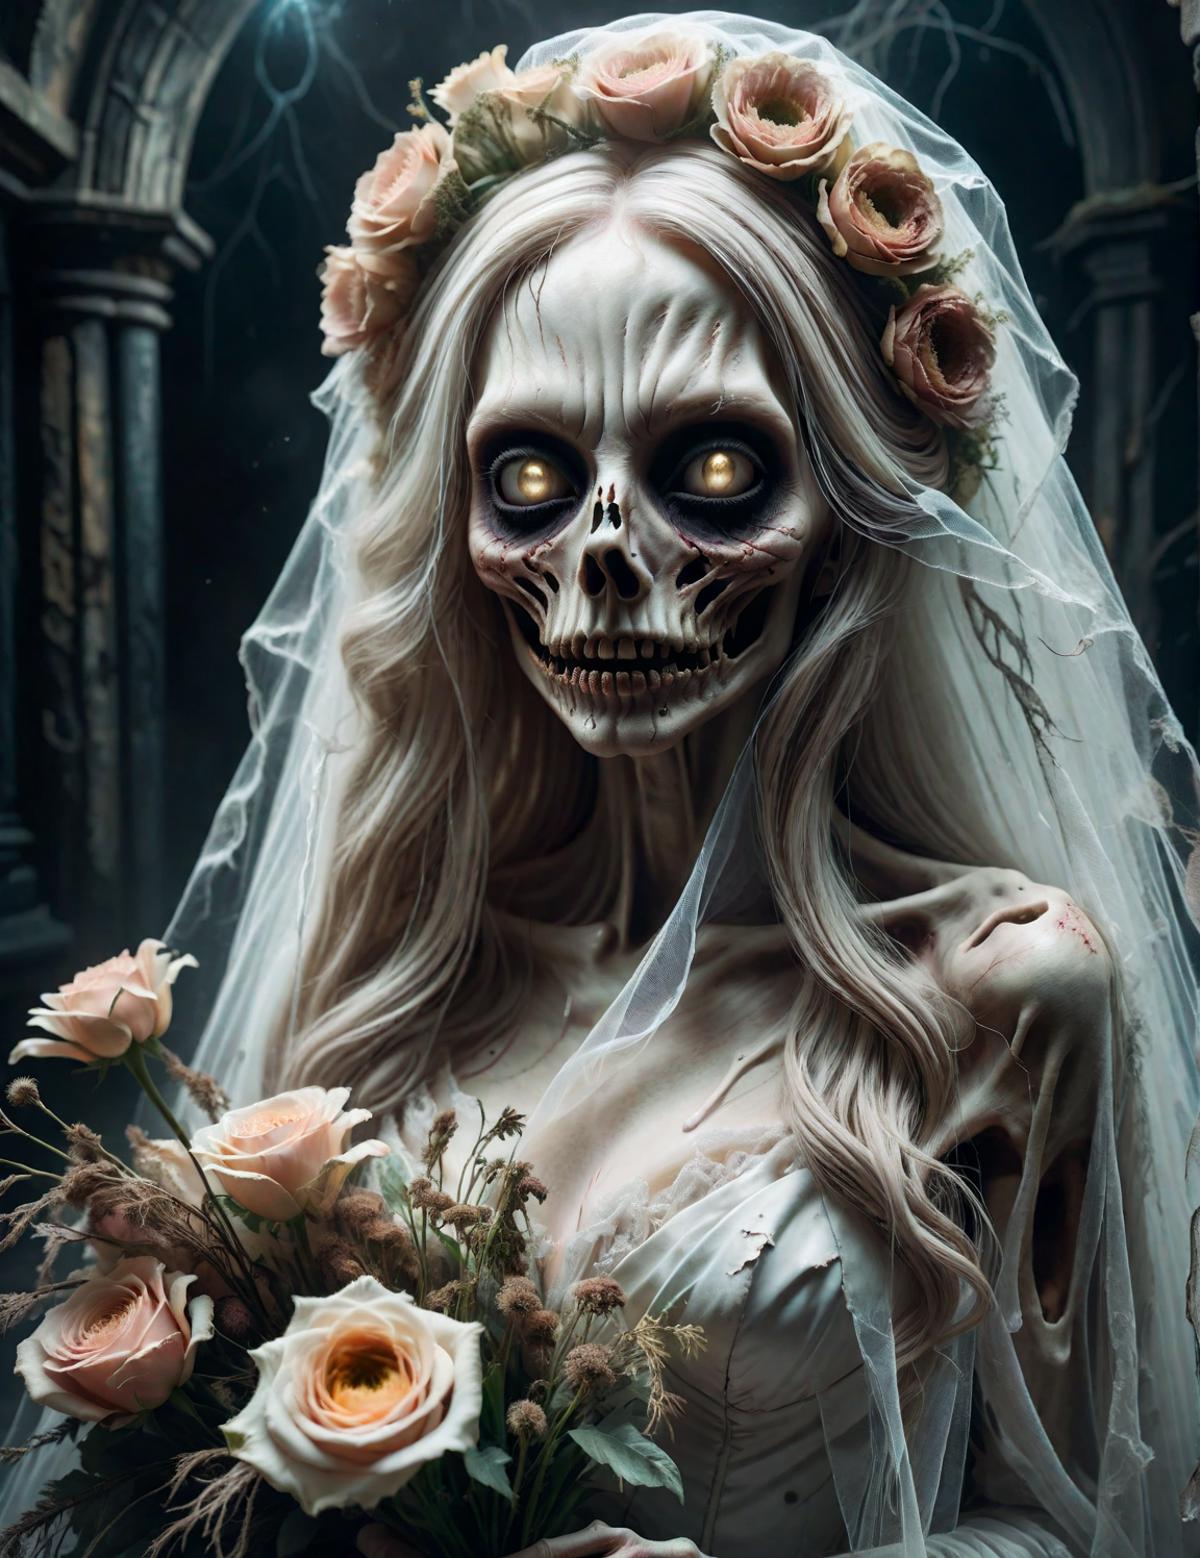 A skeleton bride with a bouquet of roses and a veil.